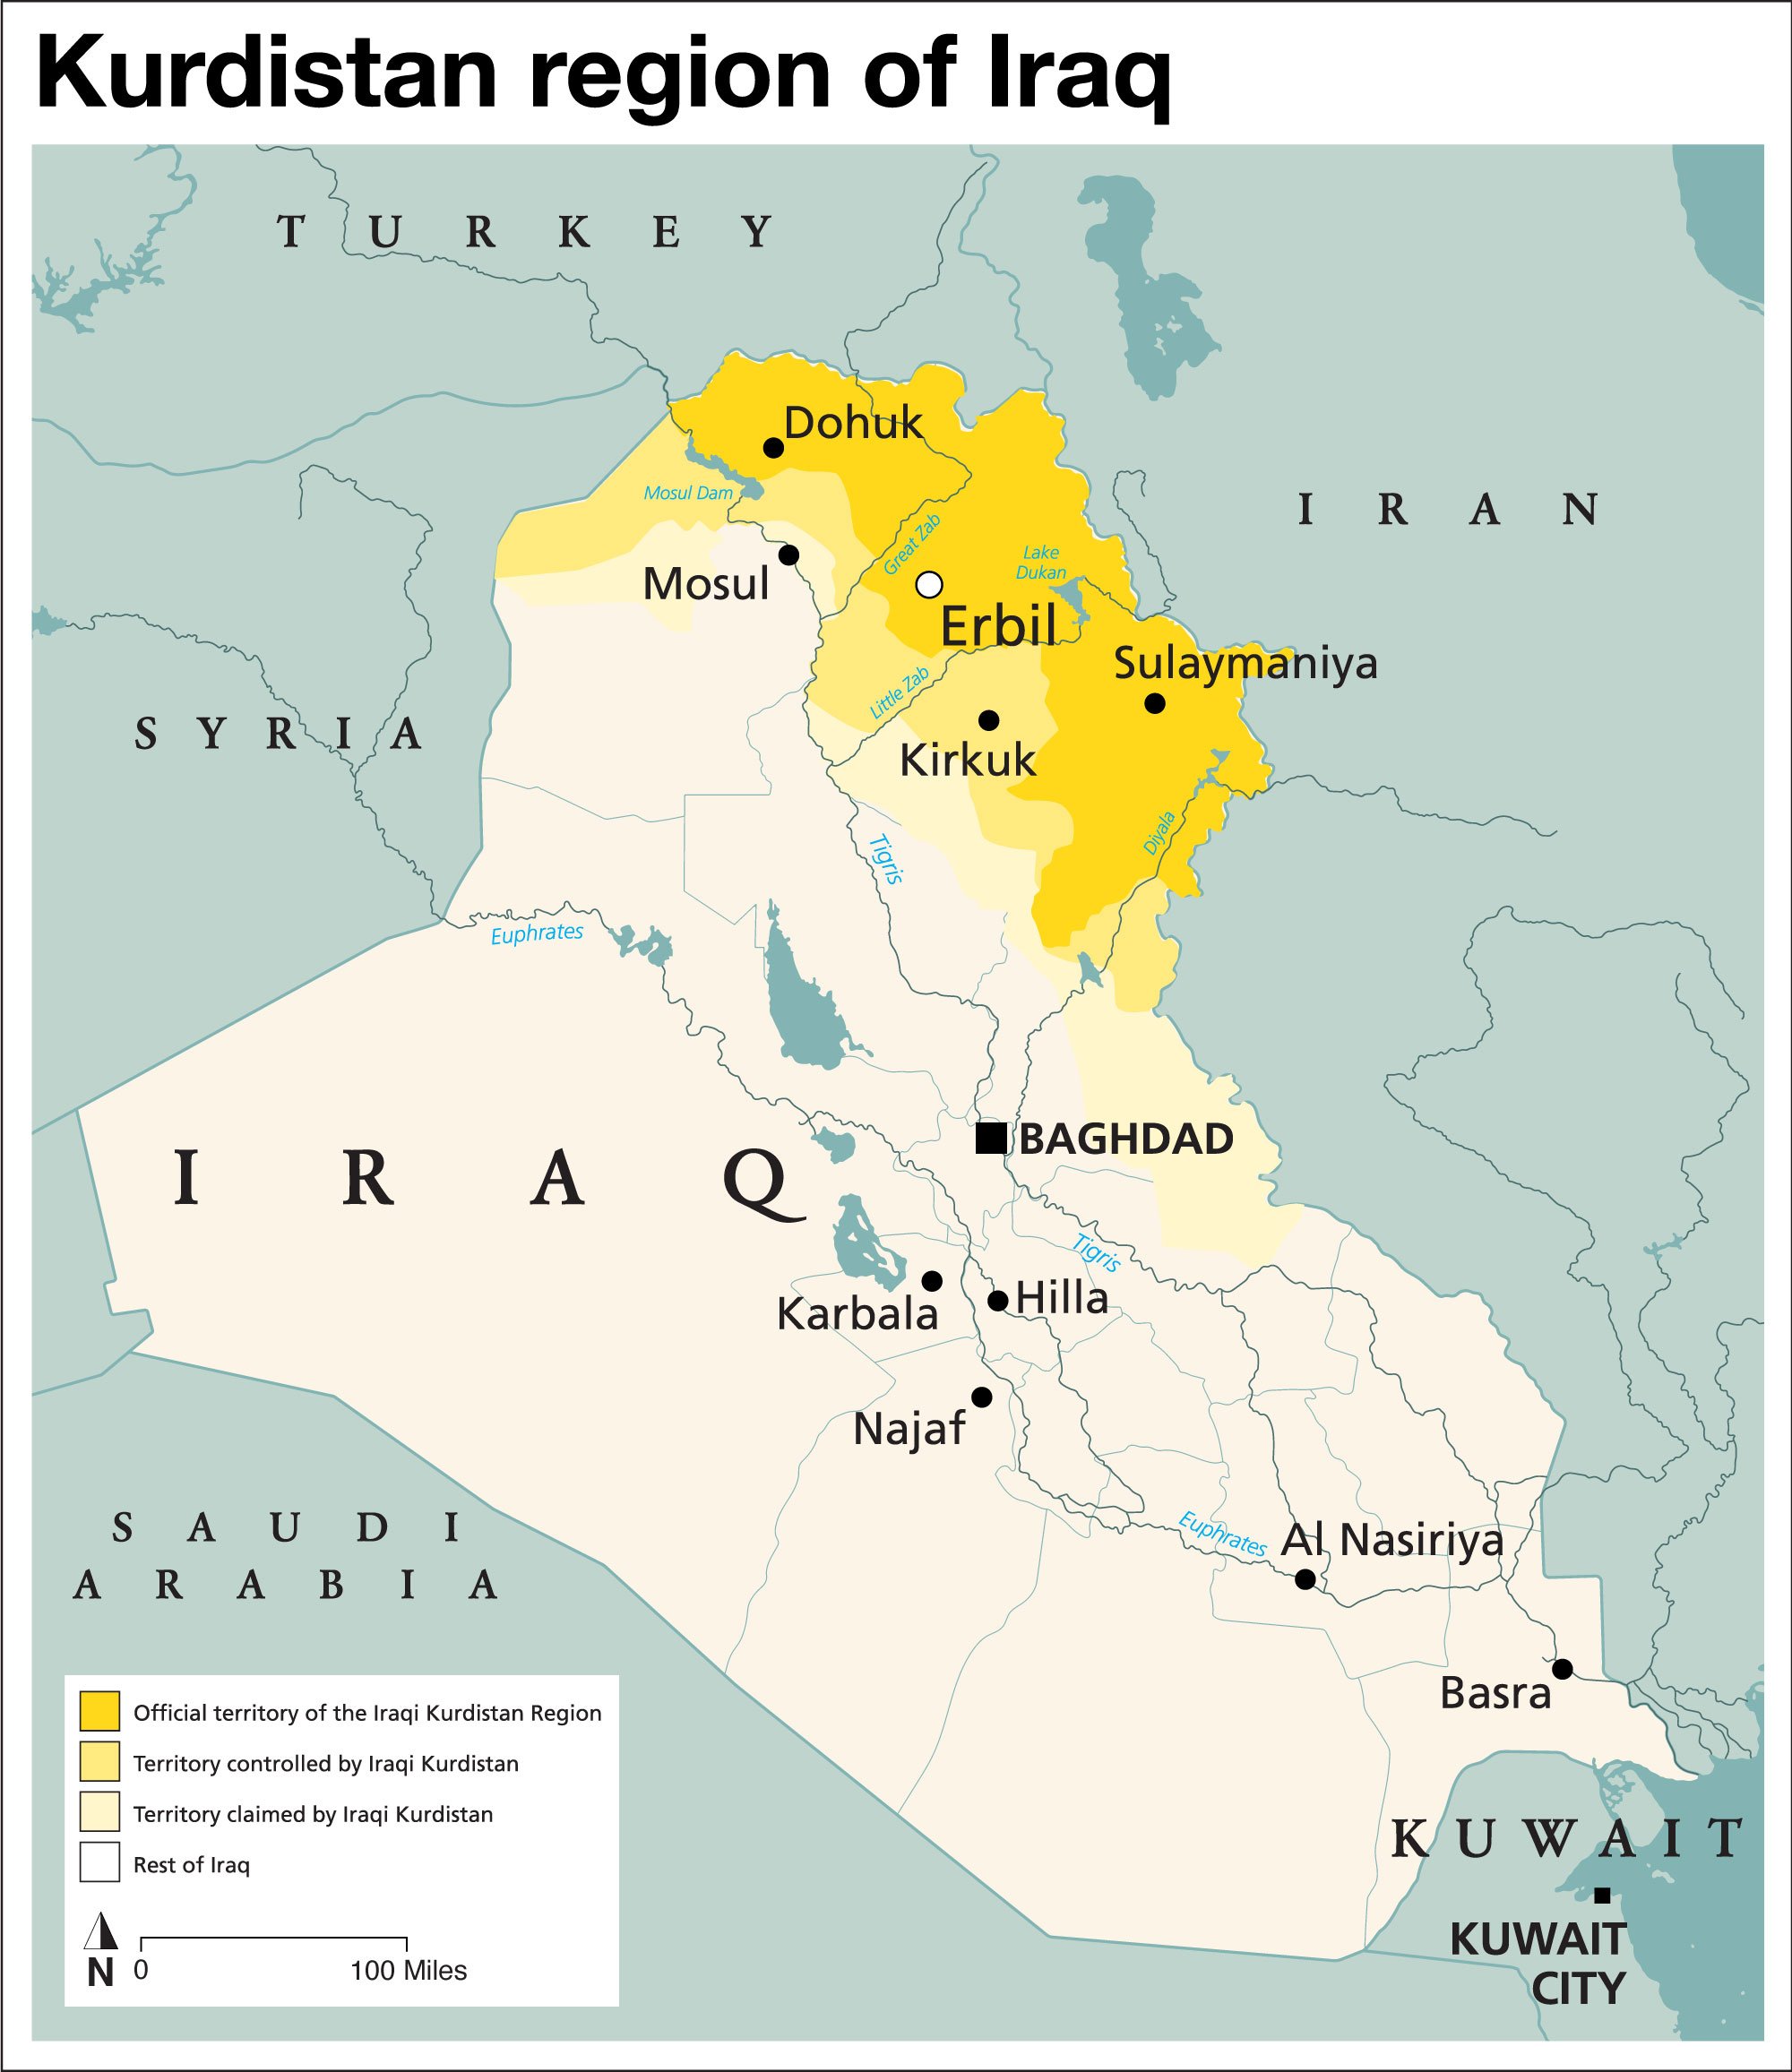 This map illustrates the location of the Kurdistan region of Iraq, where Russ Roggio established an illegal weapons factory and tortured a man in his employ.